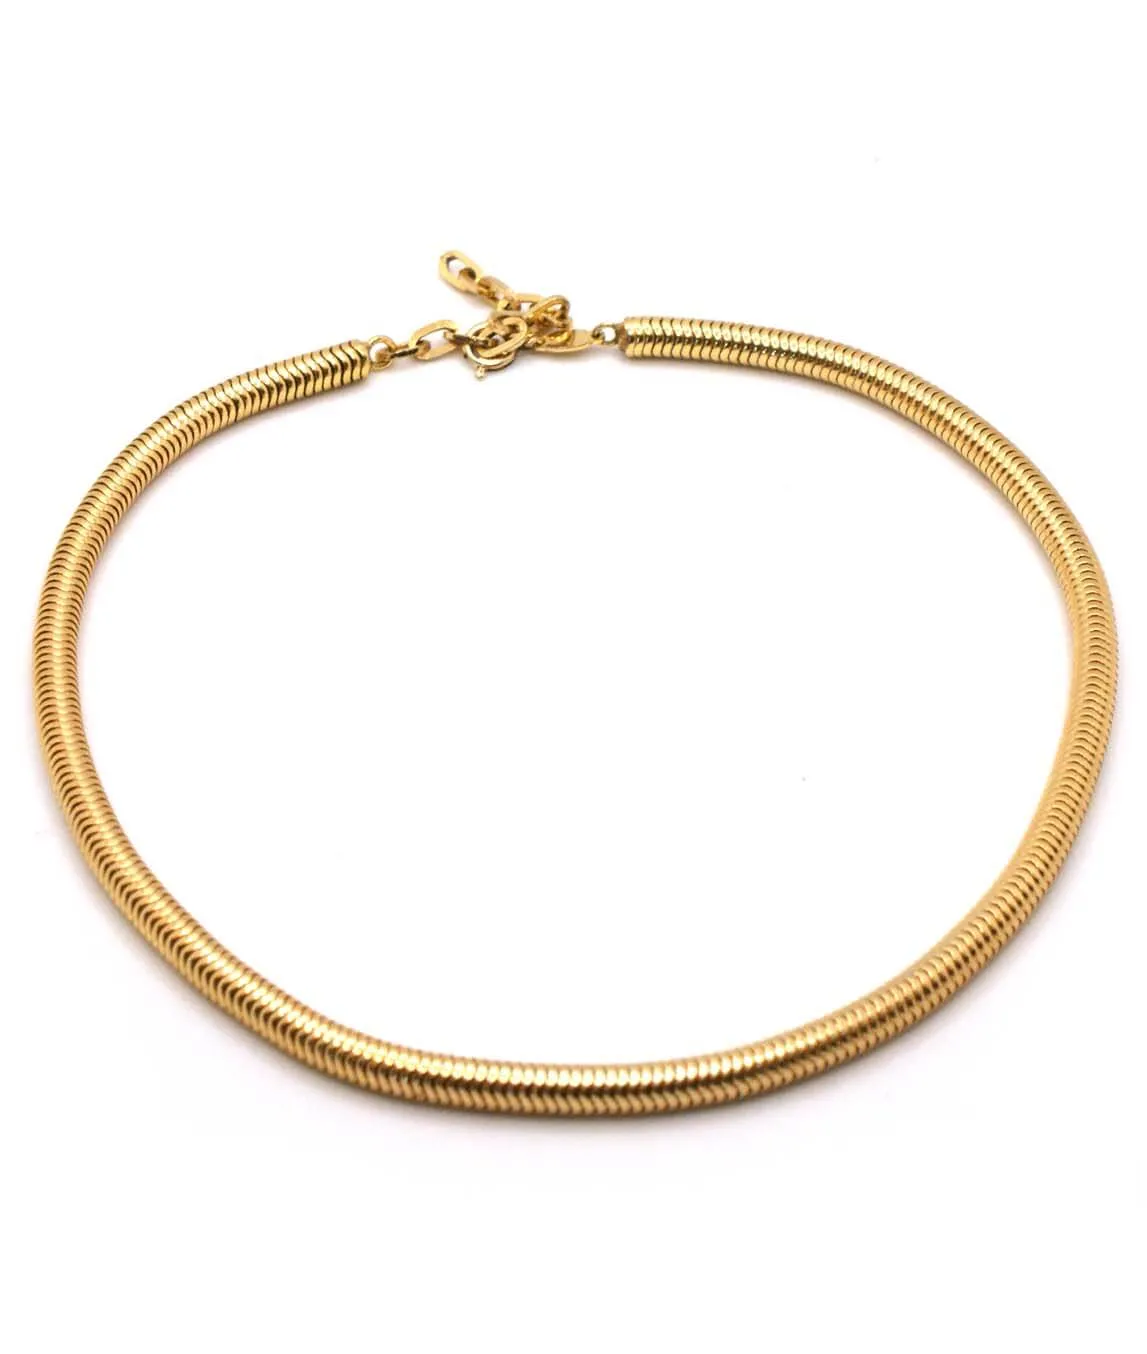 Round gold plated snake chain by Grossé 1973